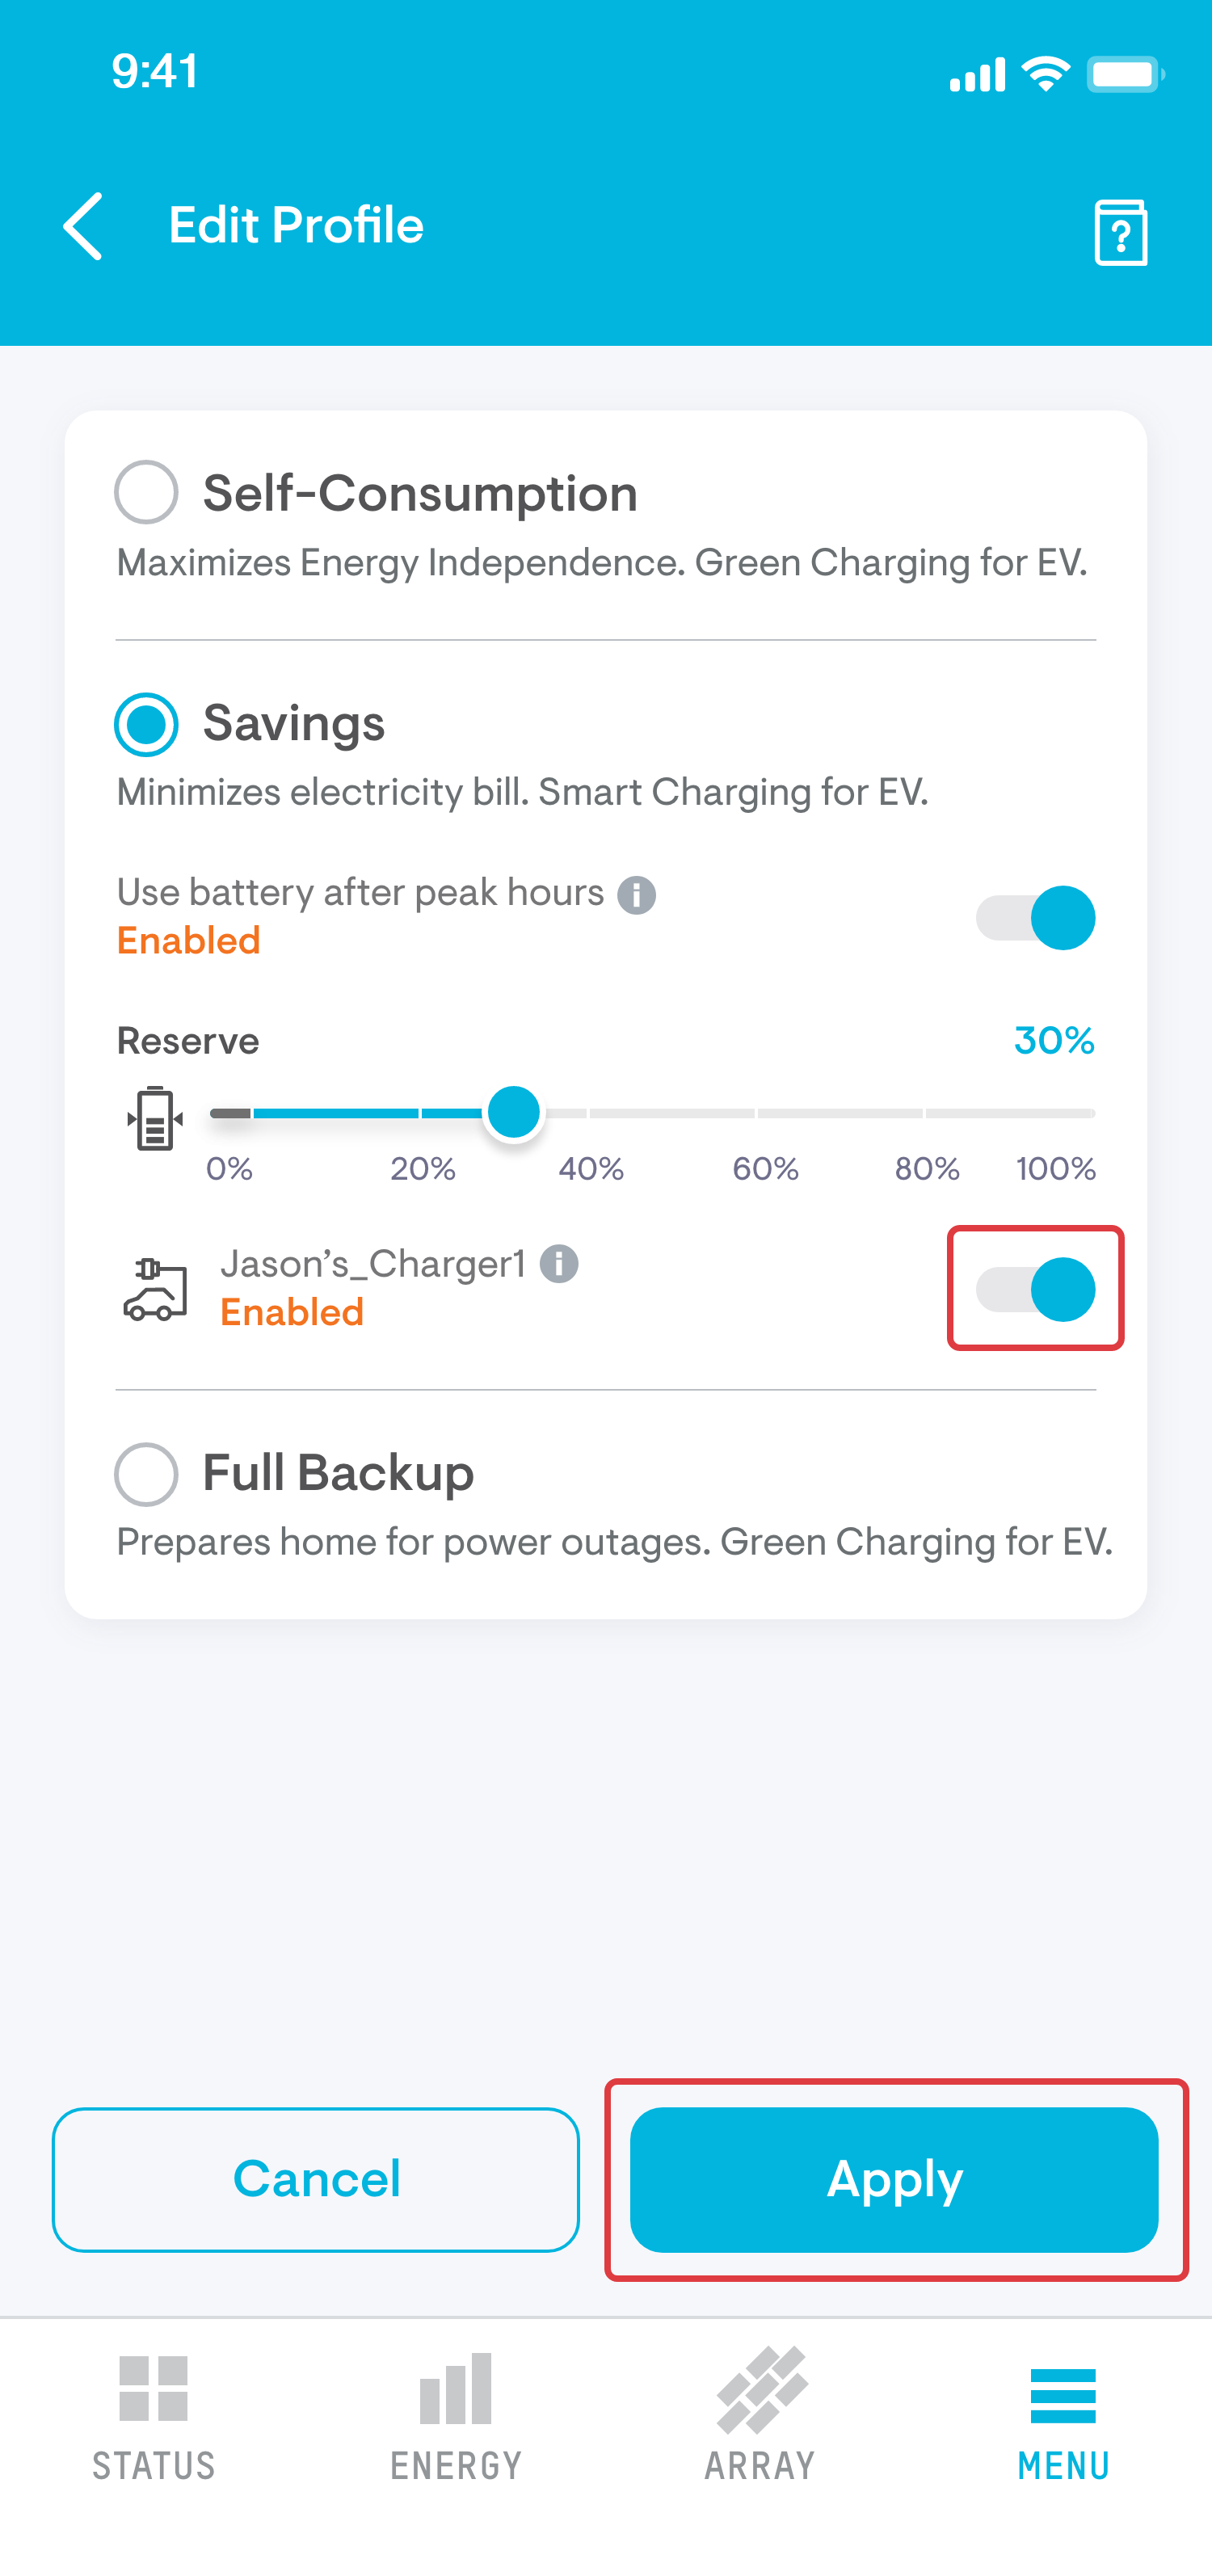 Savings view of the Enphase Energy App